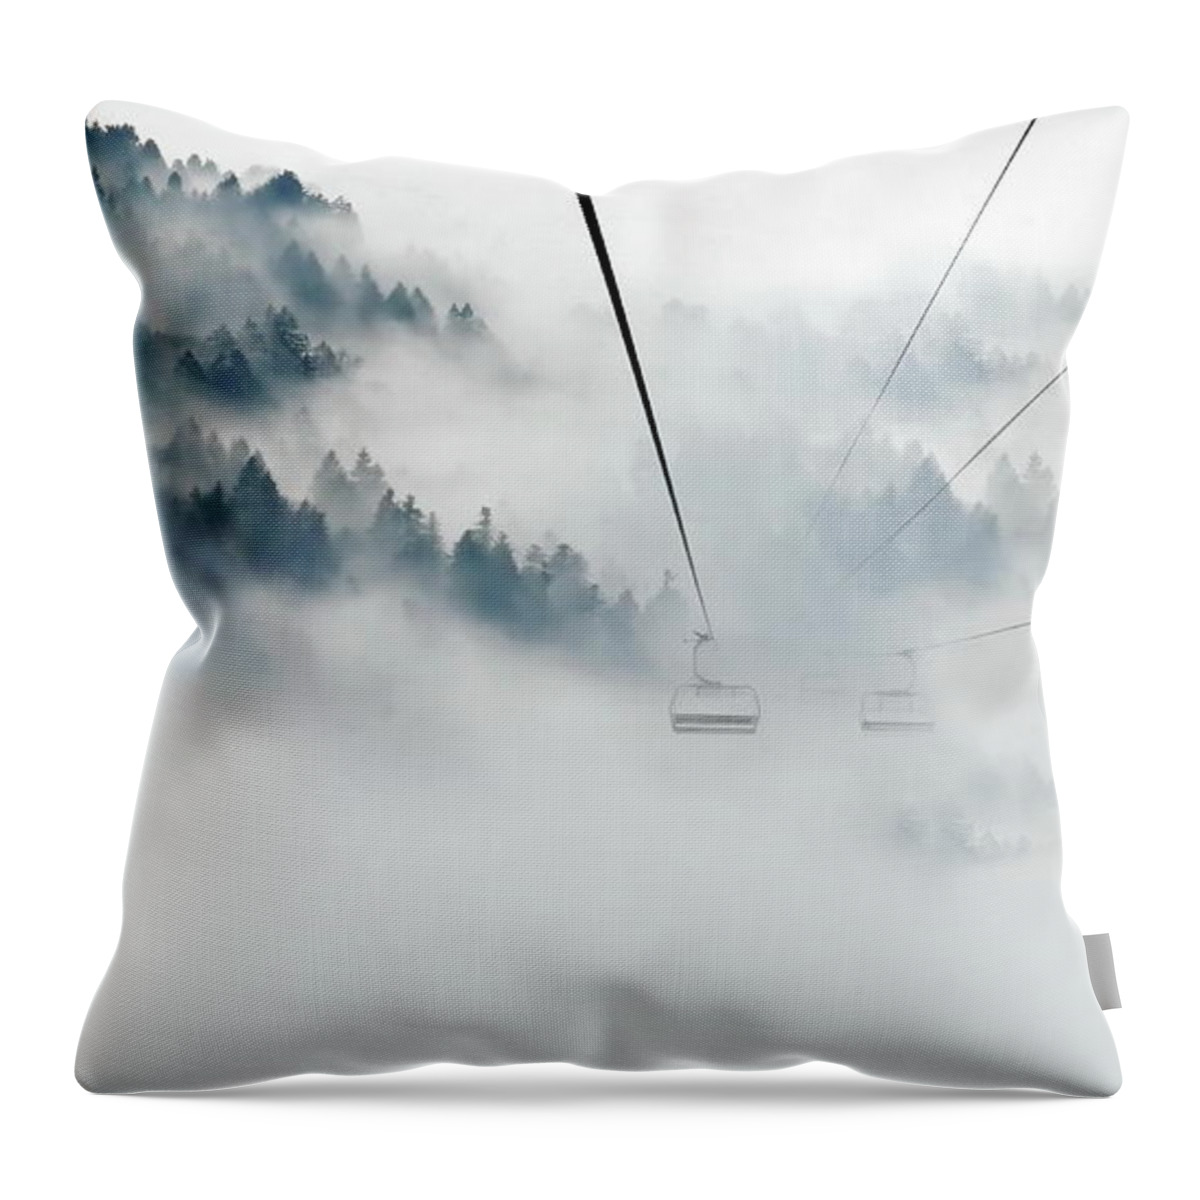 Skiing Throw Pillow featuring the photograph Into the Abyss by Andrea Kollo